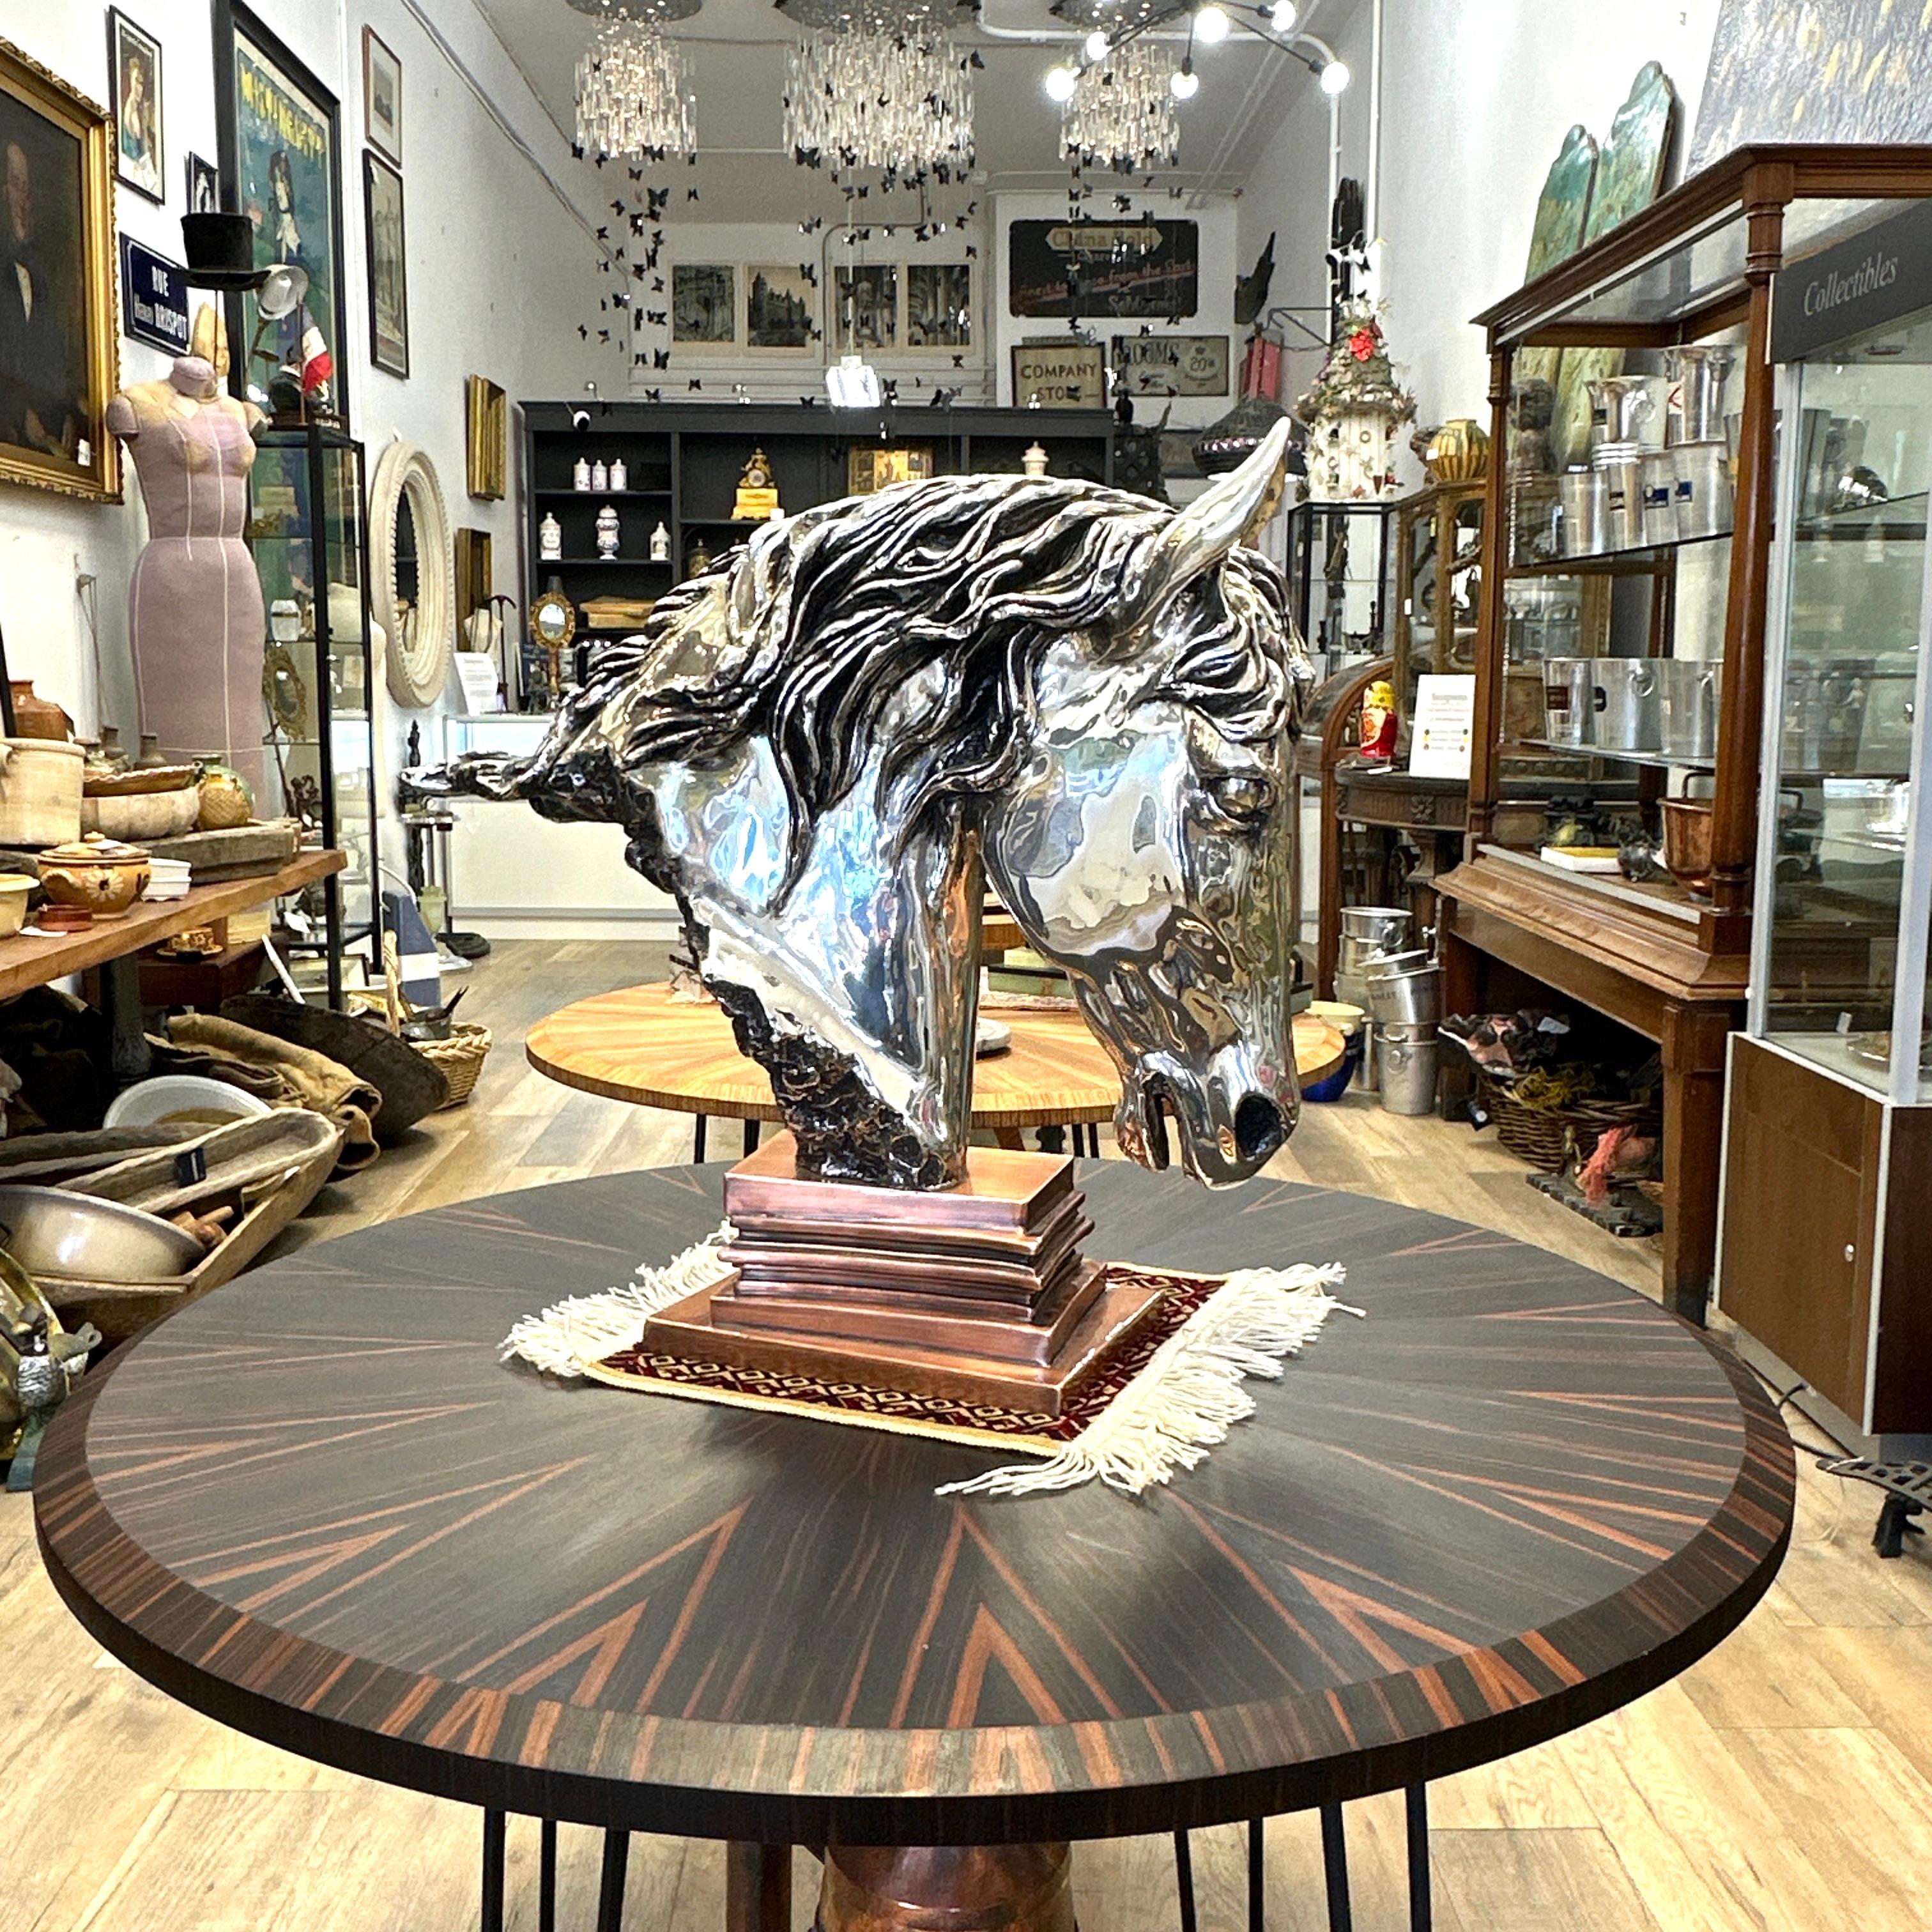 Here is a silver plated Horse Head sculpture by D'Argenta and artist Ricardo del Rio. This wonderfully detailed sculpture deserves a place of honor in your home. Its head is tilted in a position that conjures images of this beautiful mount standing